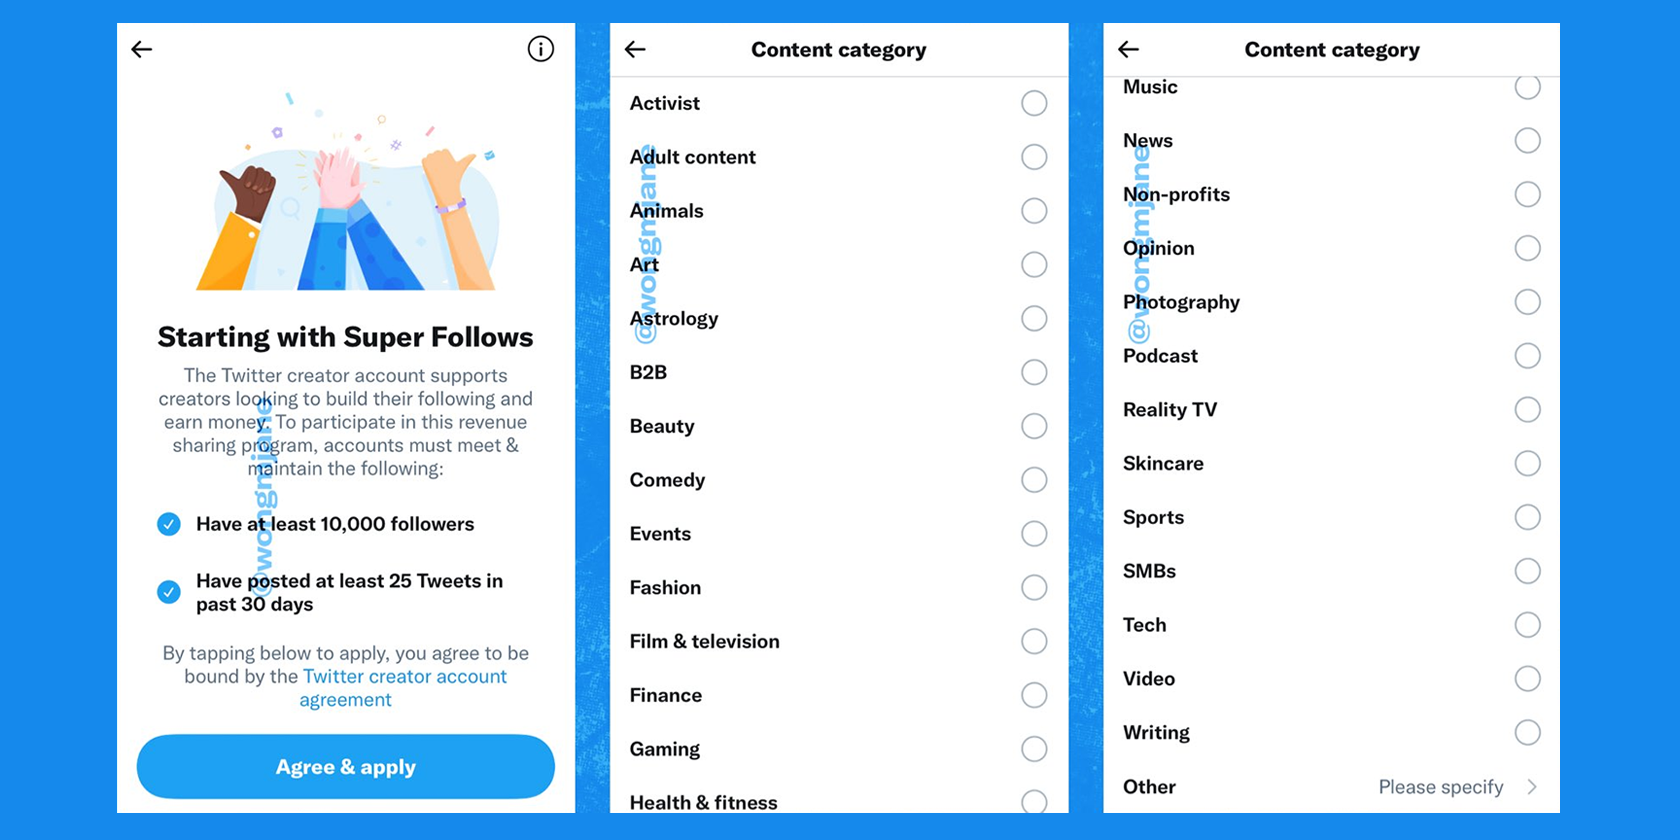 Content categories when applying for Super Follows